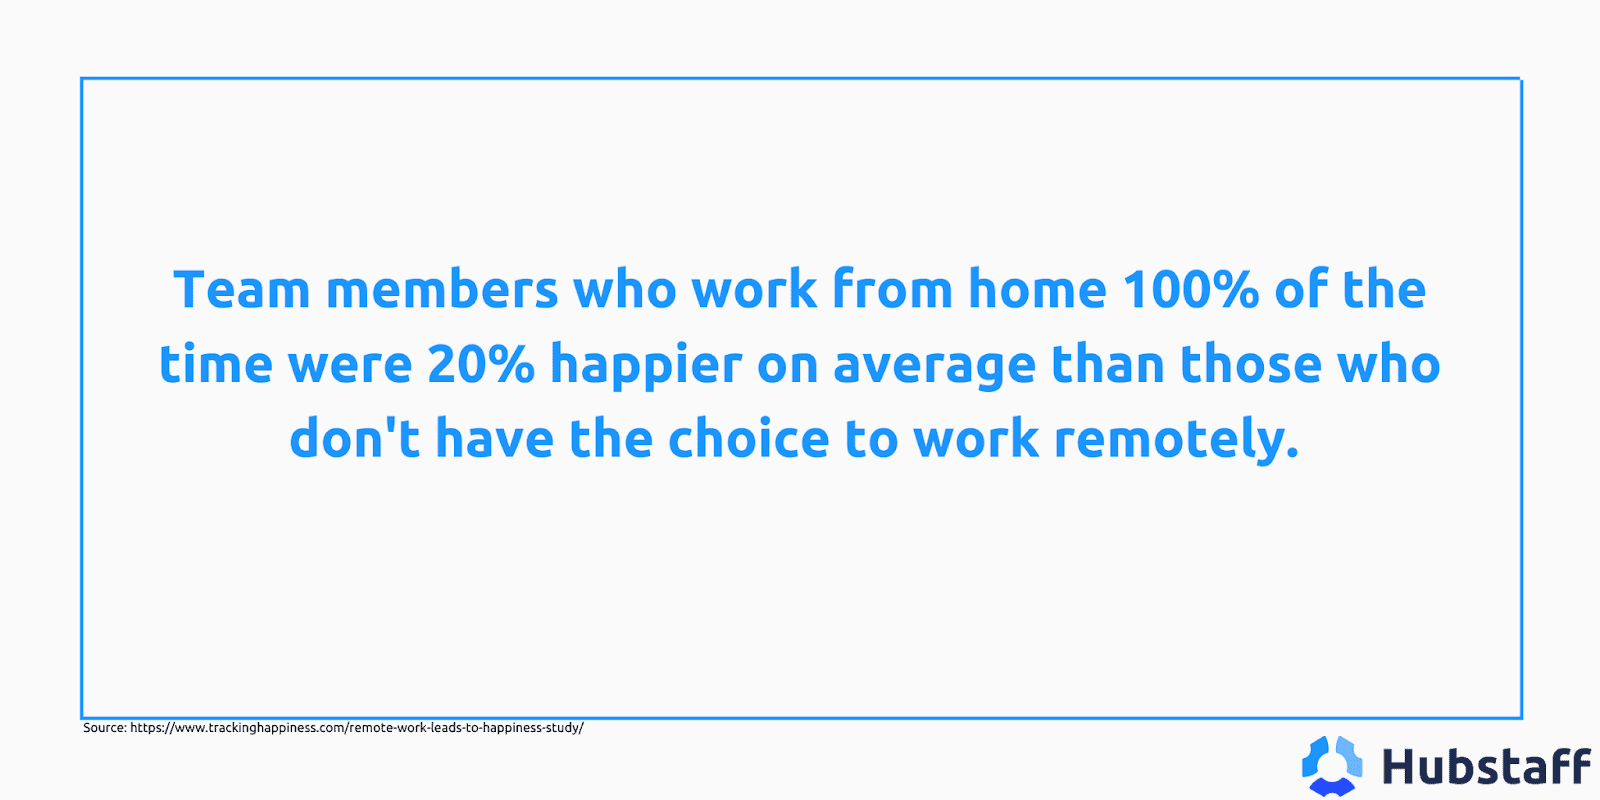 Team members who work from home 100% of the time were 20% happier on average than those who don't have the choice to work remotely.